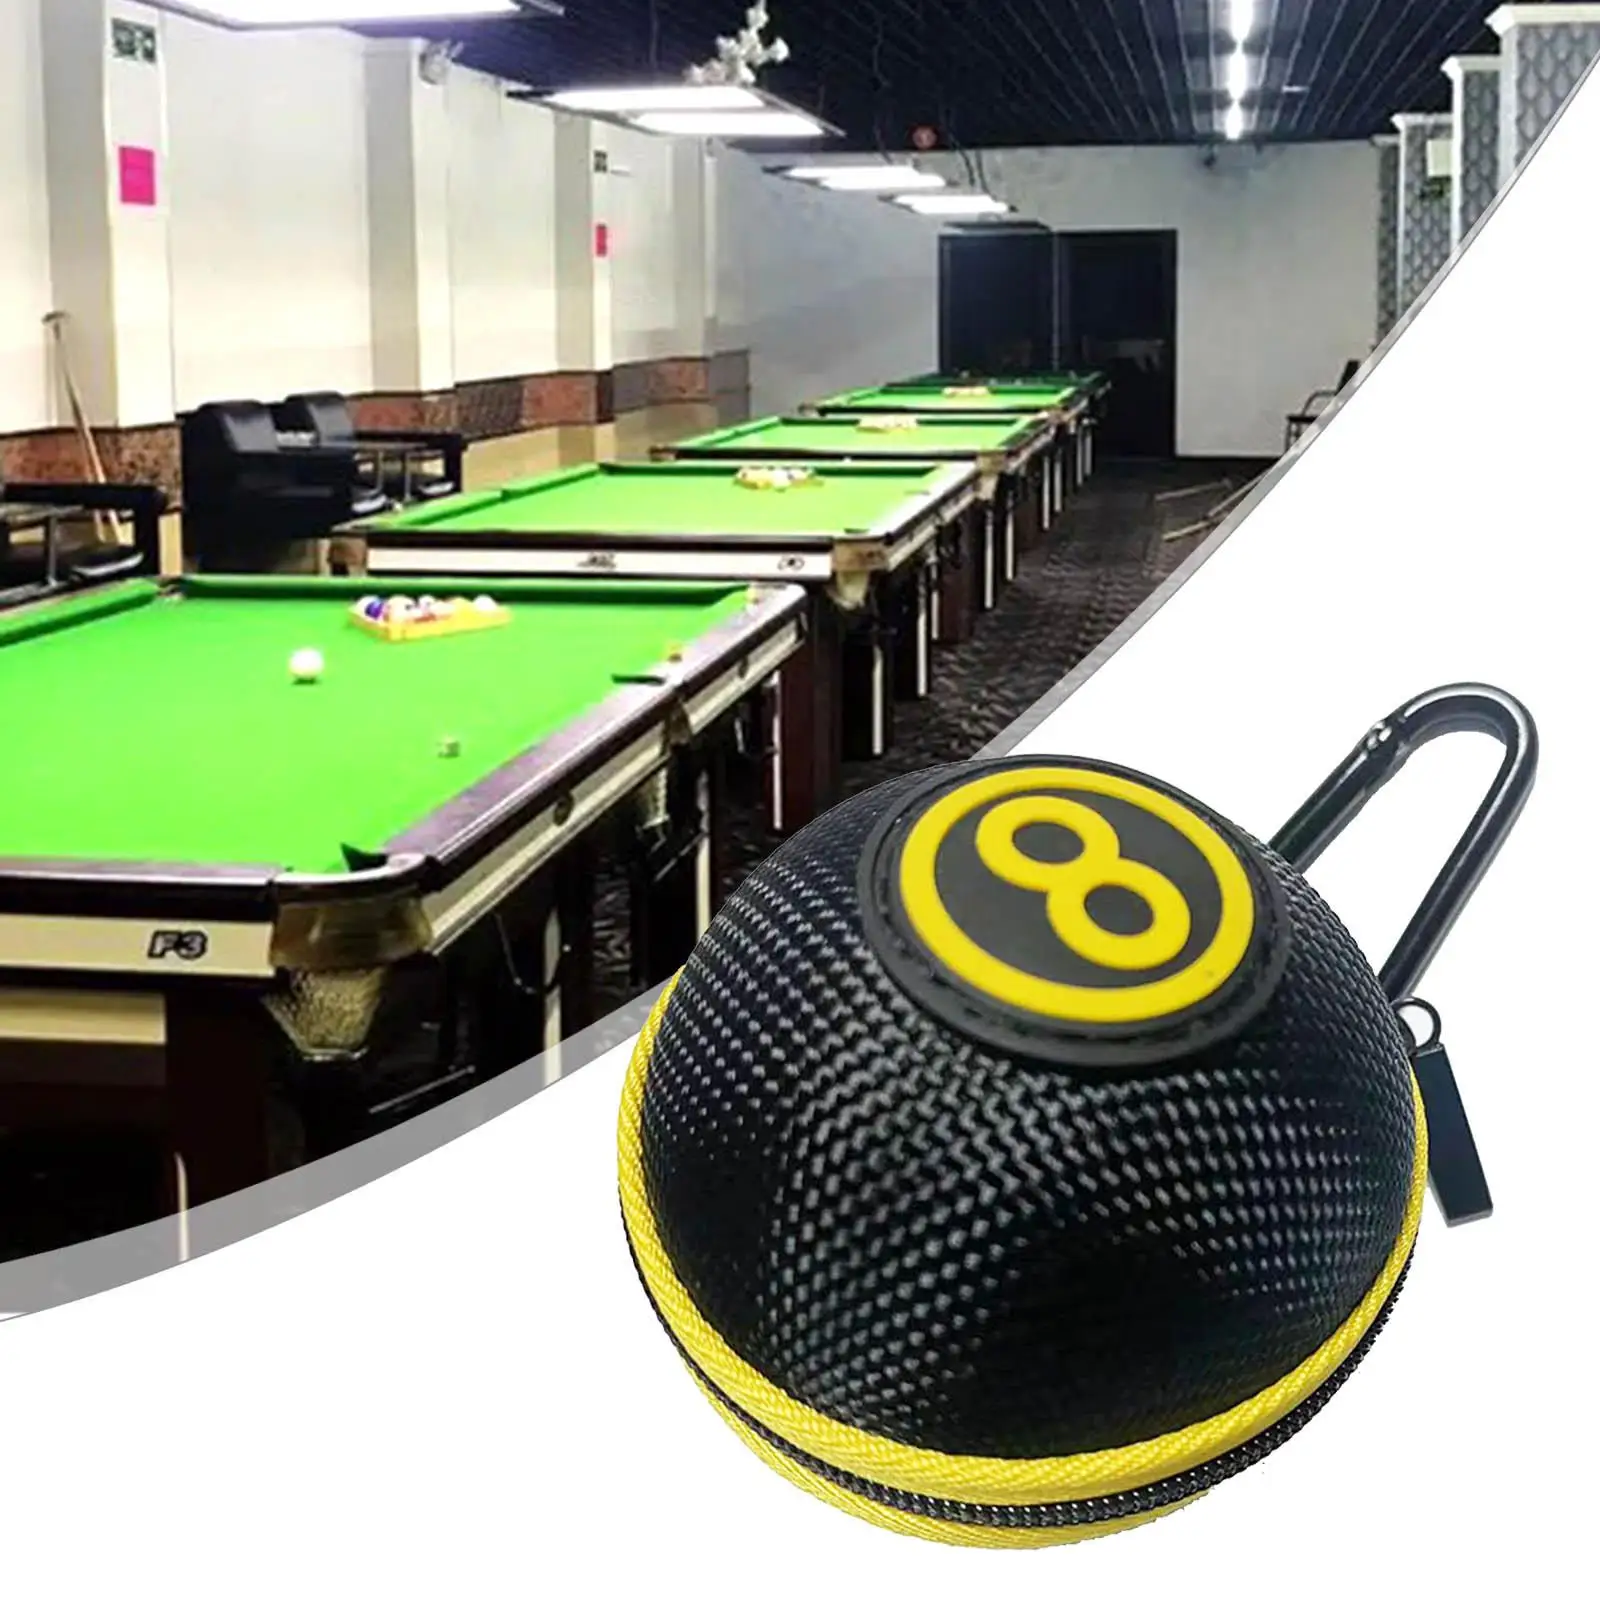 Premium Cue Ball Case Protector Holder Cue Chalk Bag Travel to Cue Stick Bag Carrying Bag for Attaching Cue Ball Billiard Ball